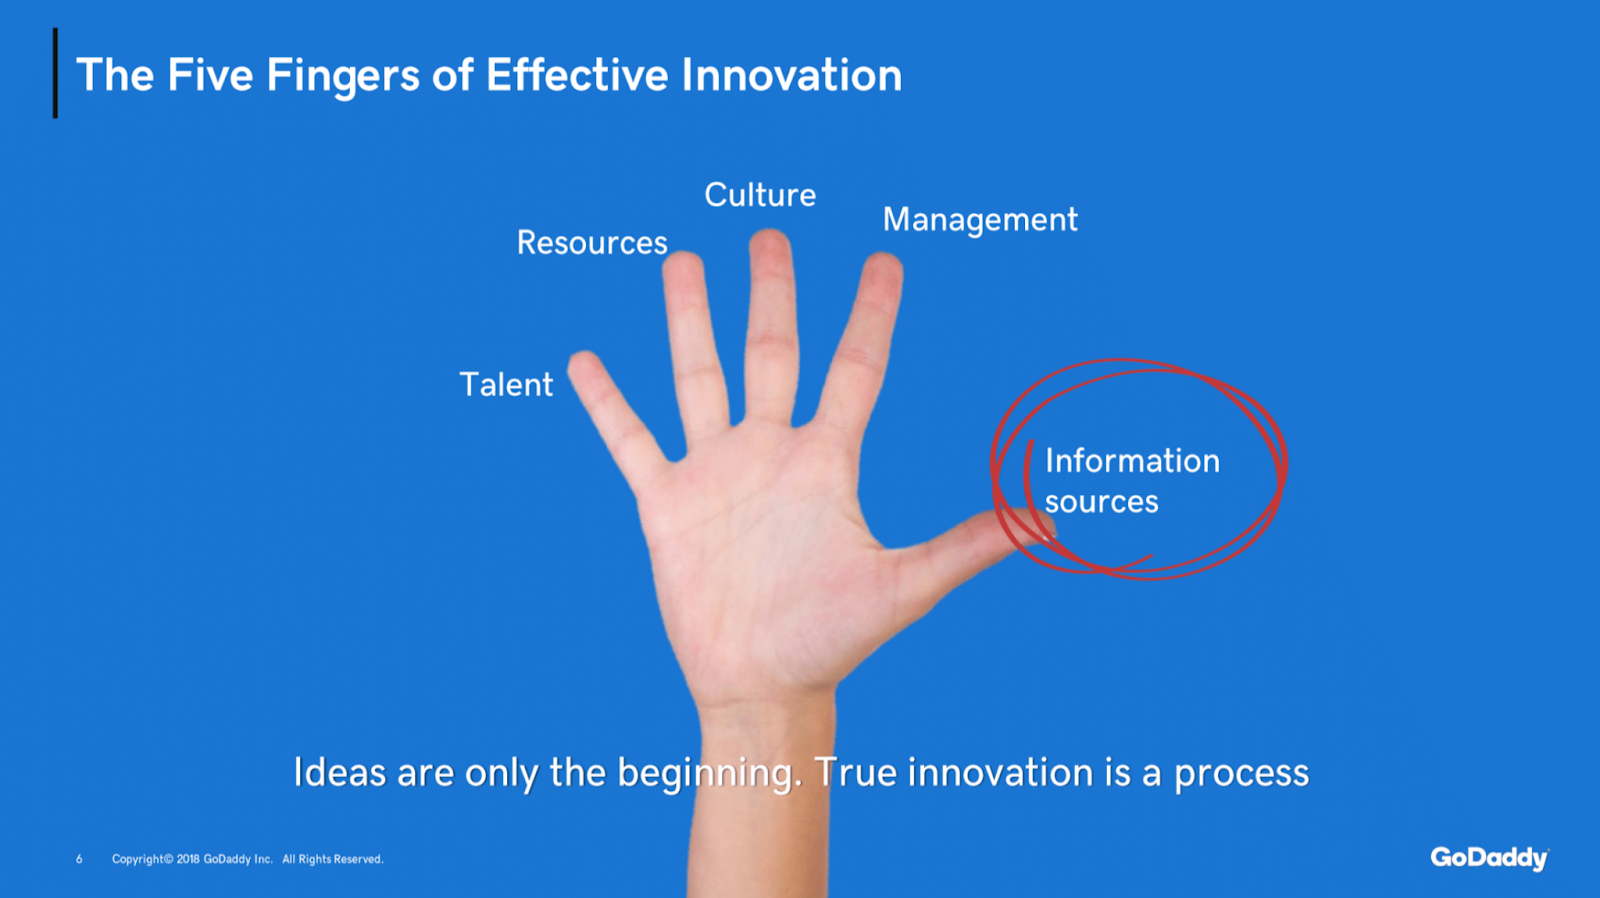 The five fingers of innovation theory: Talent, resources, culture, management, information sources.